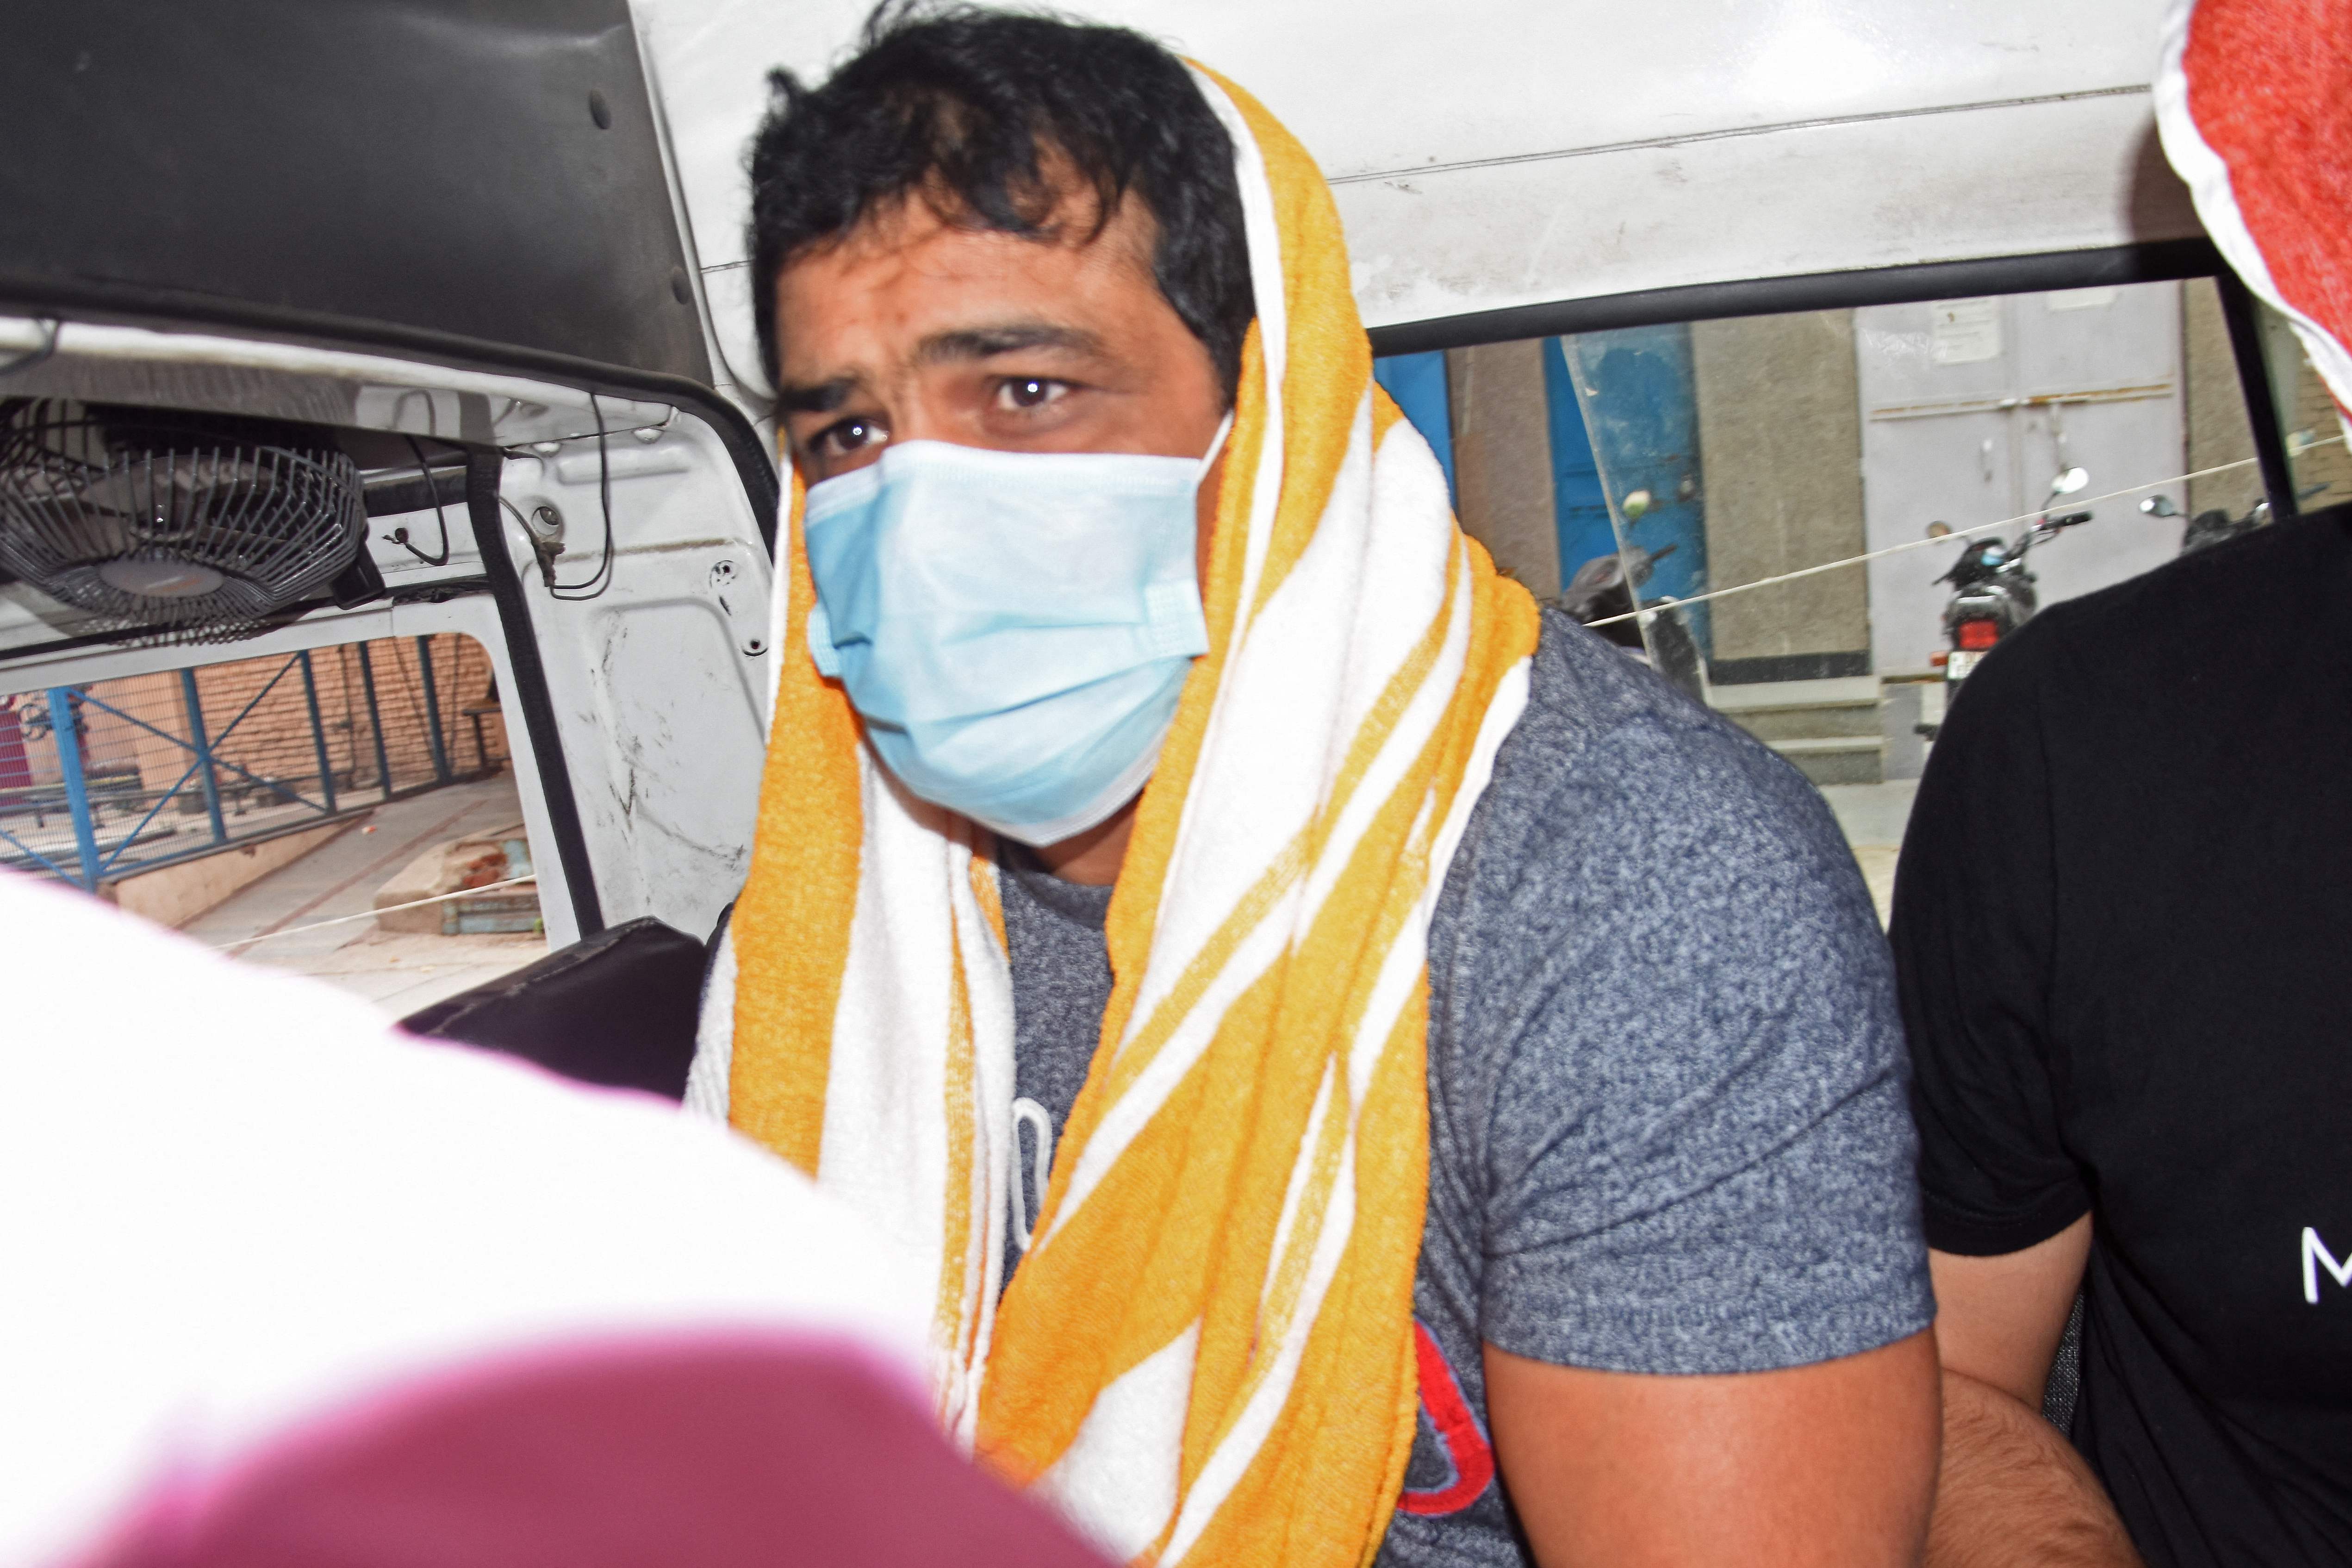 Olympic wrestler Sushil Kumar sits inside a vehicle after his arrest in New Delhi on 23 May, 2021